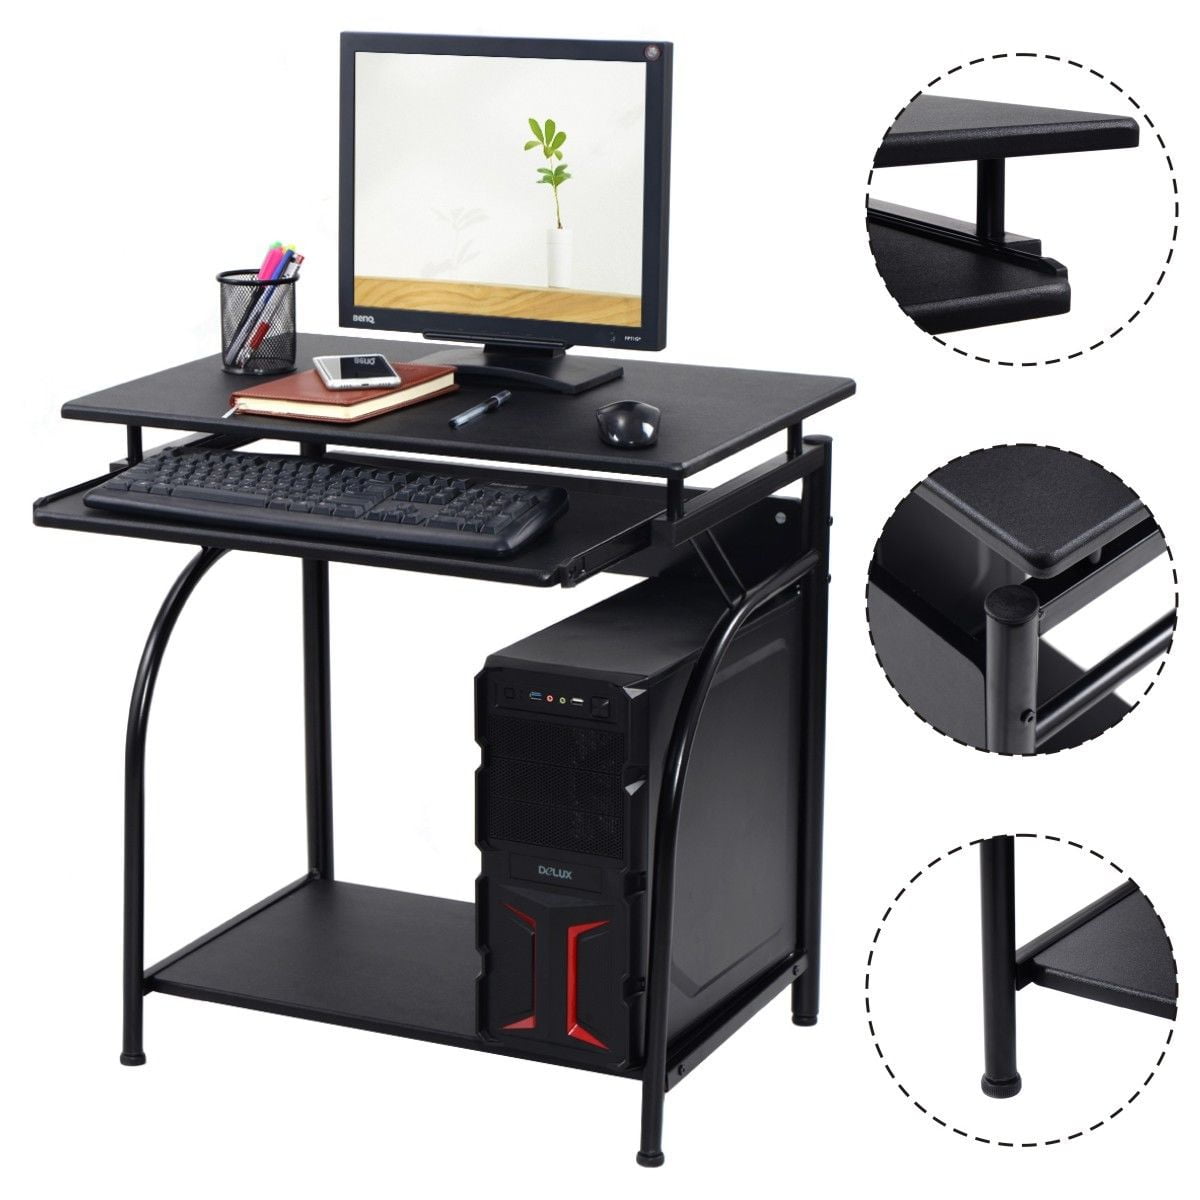 Computer Desk Table Workstation Home Office Student Dorm PC Laptop Writing Study